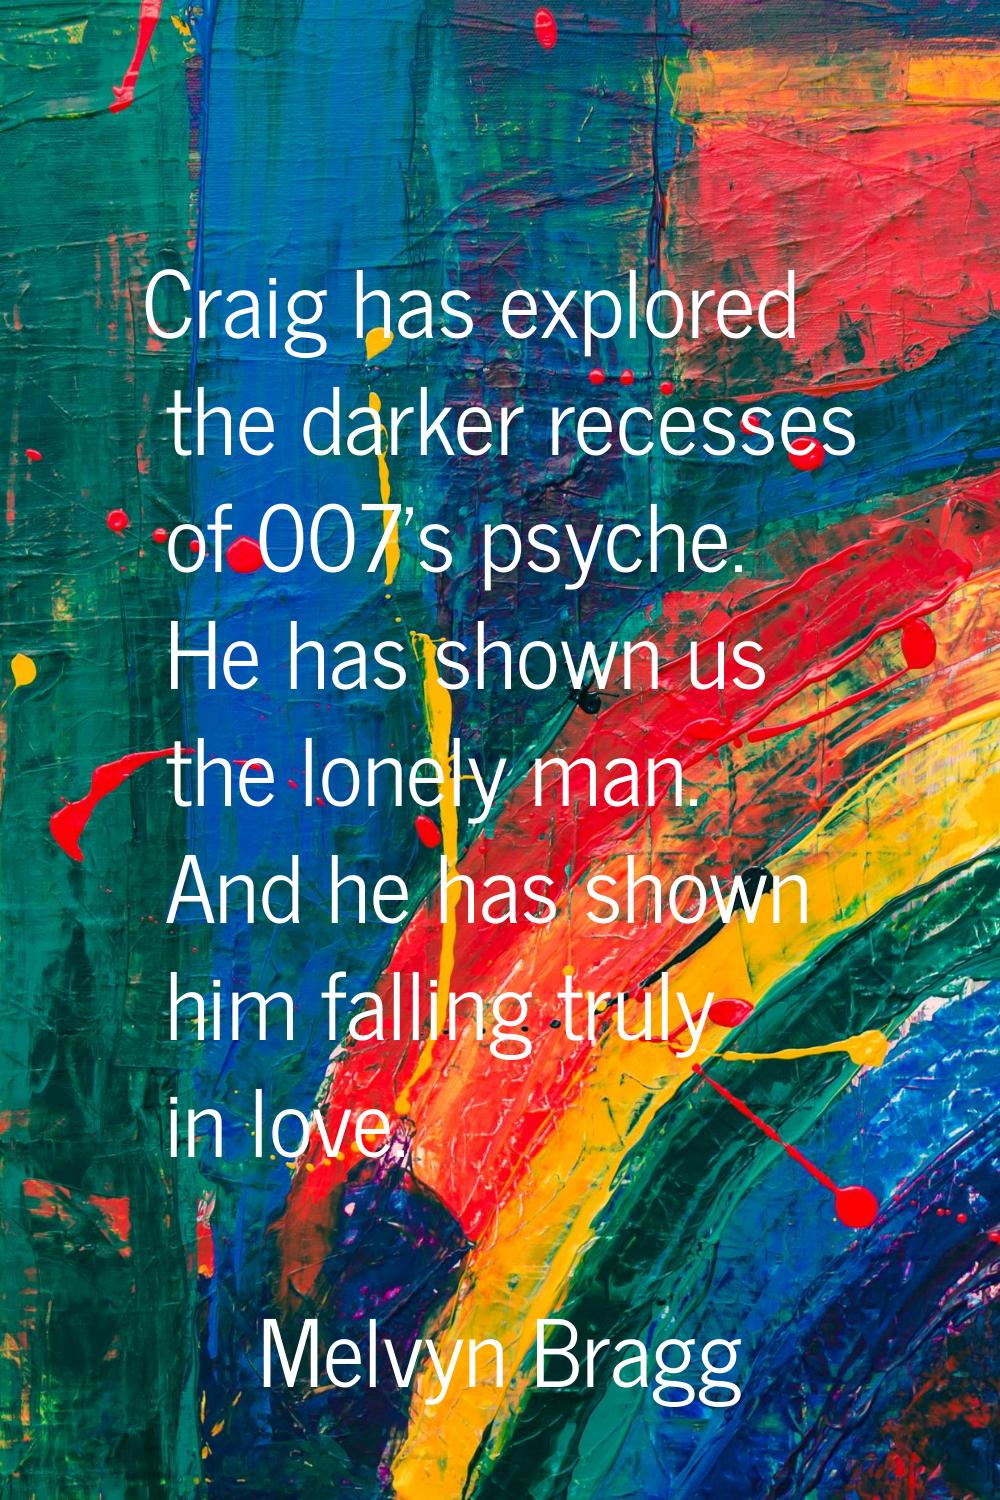 Craig has explored the darker recesses of 007's psyche. He has shown us the lonely man. And he has 